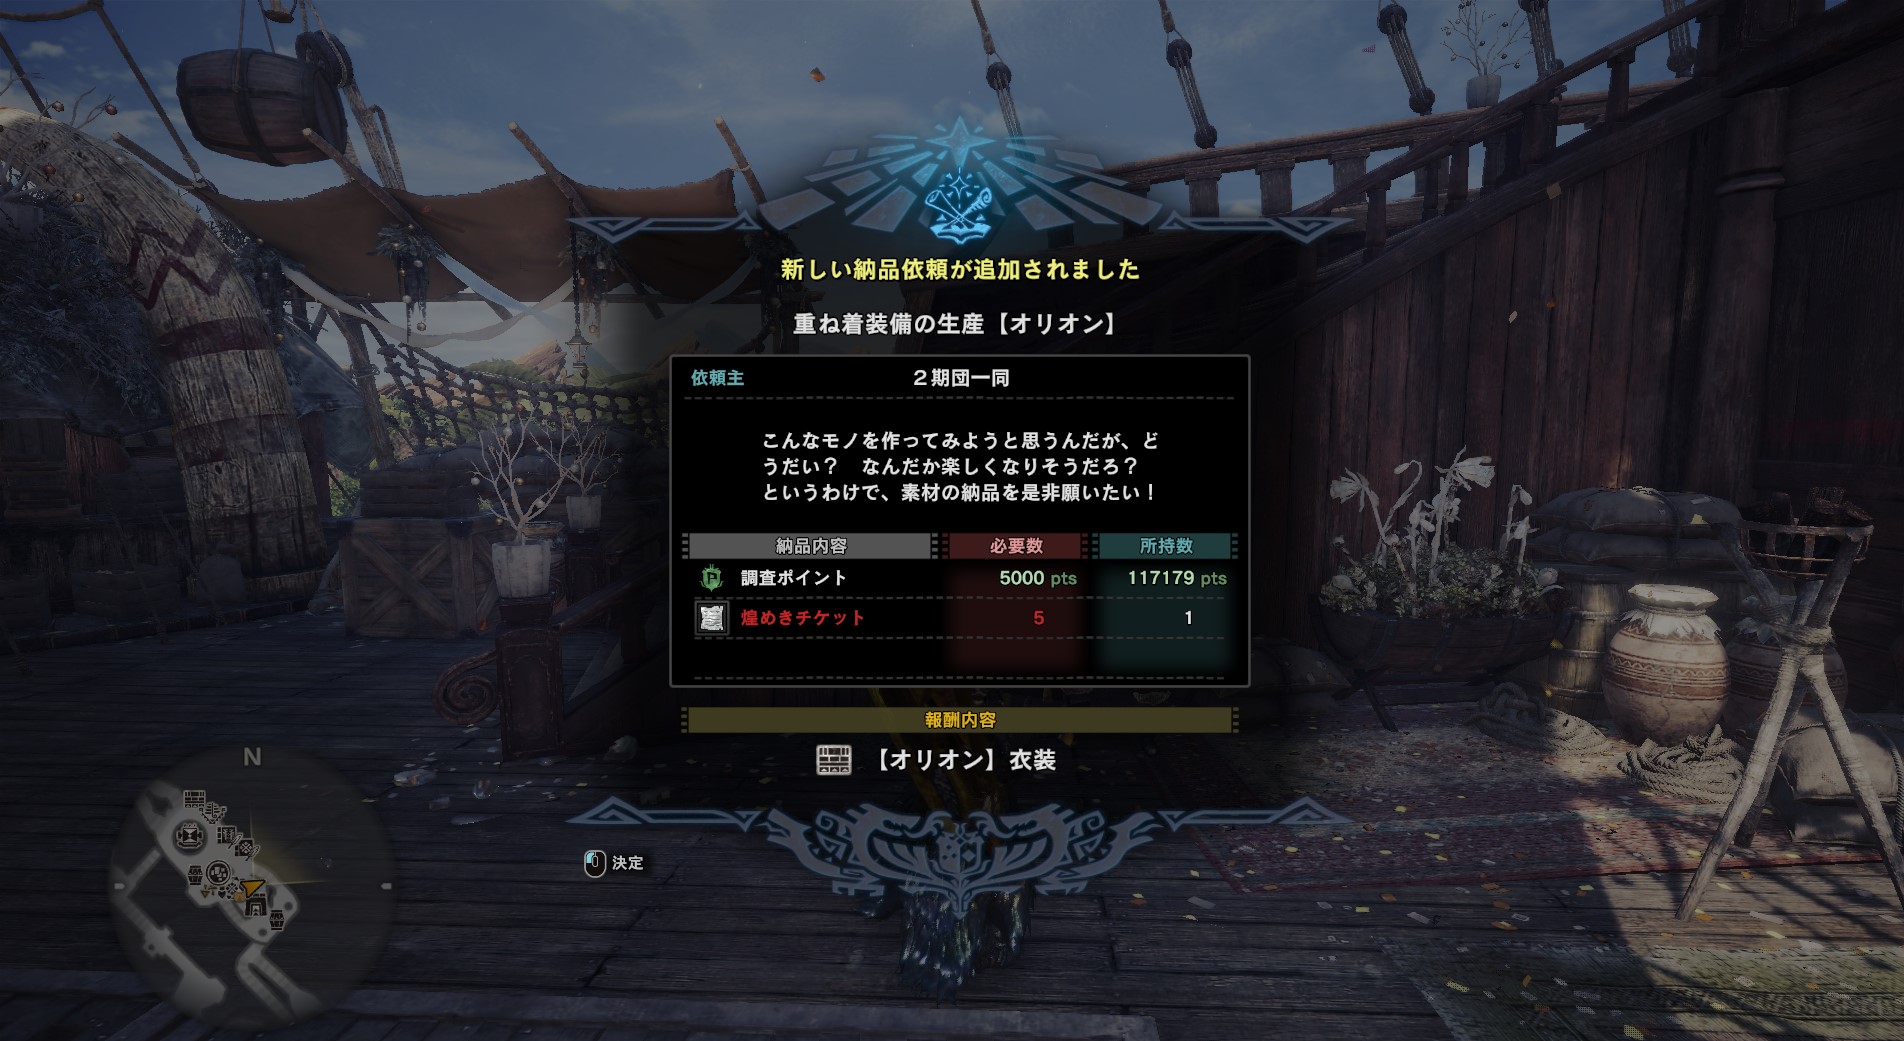 Mhw Pc アステラ祭 煌めきの宴 のまとめ This Is Between Us